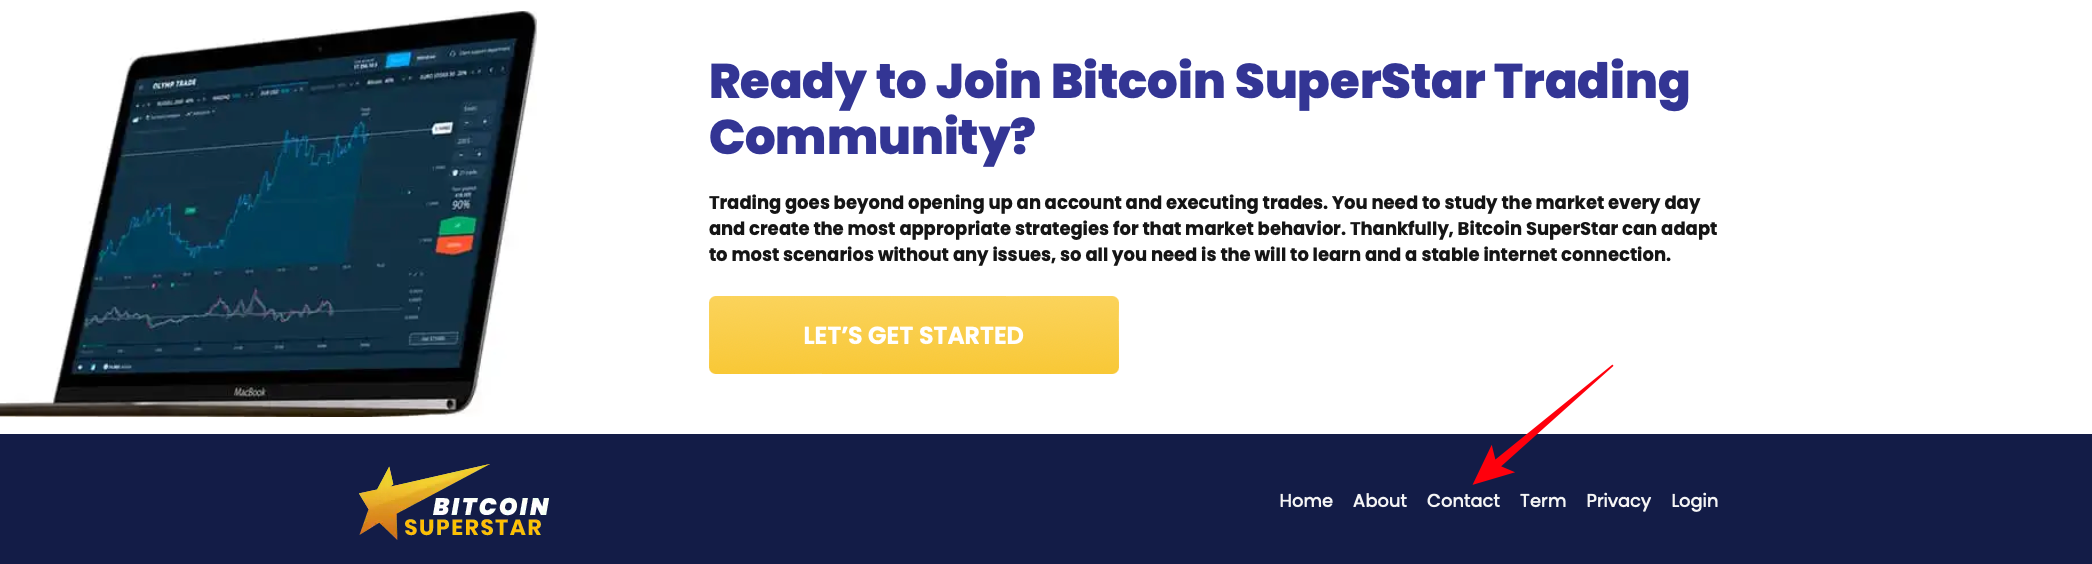 How to contact the customer support of Bitcoin superstar